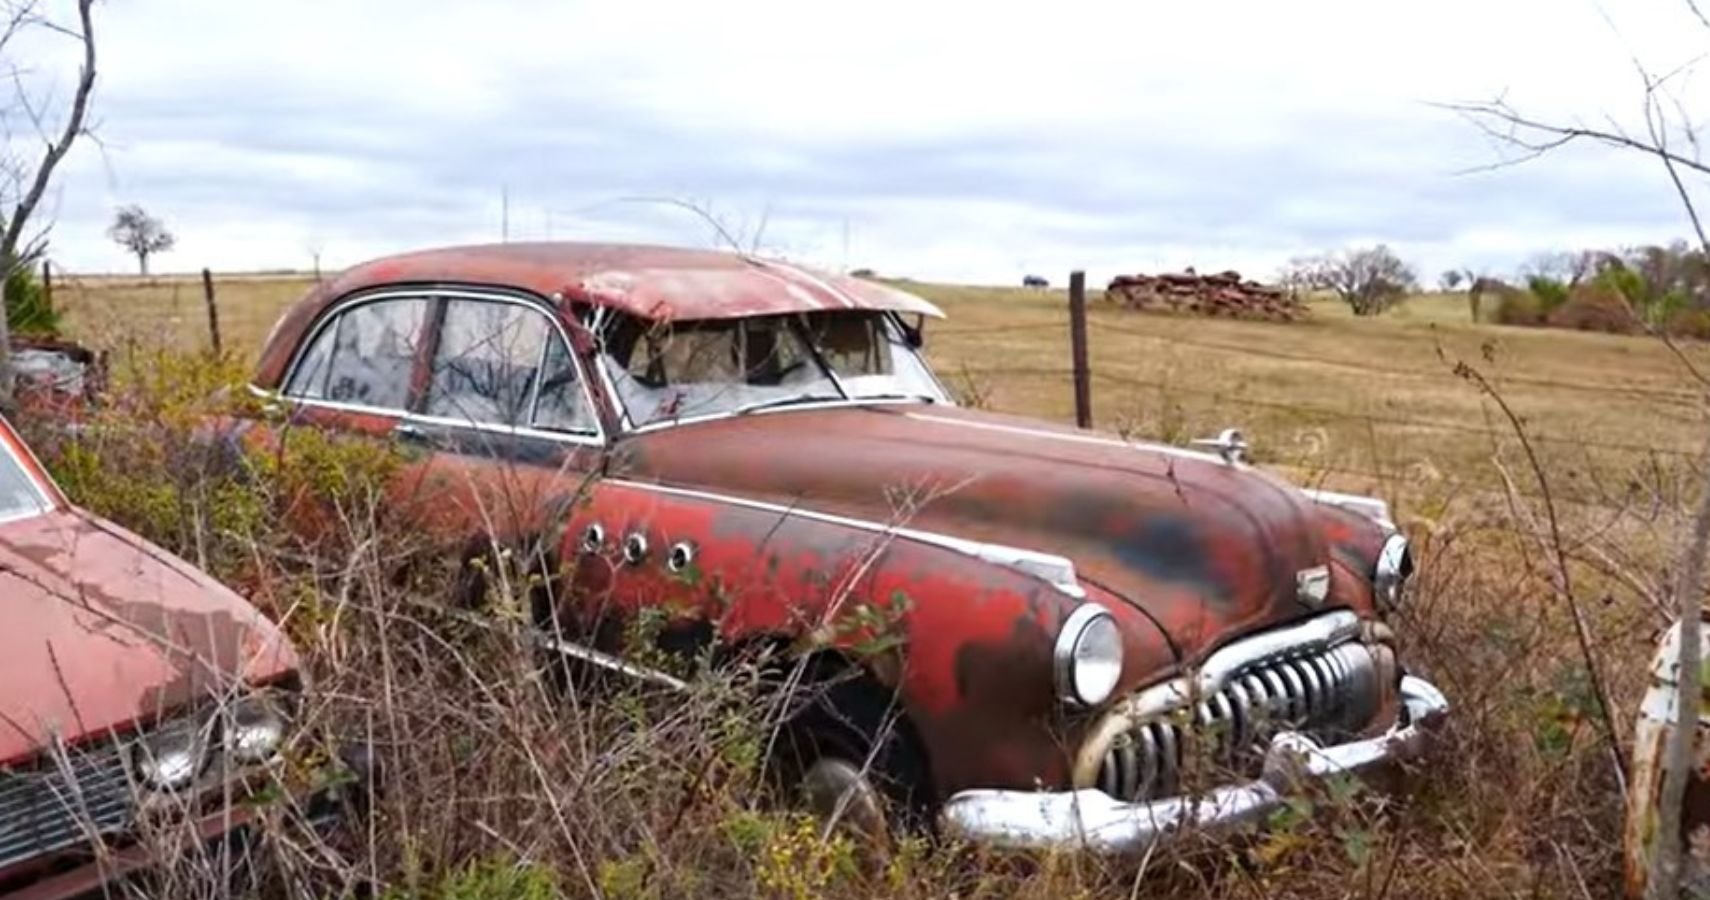 A Millionaire's Abandoned Classic Car Collection Offers Some Hidden Gems